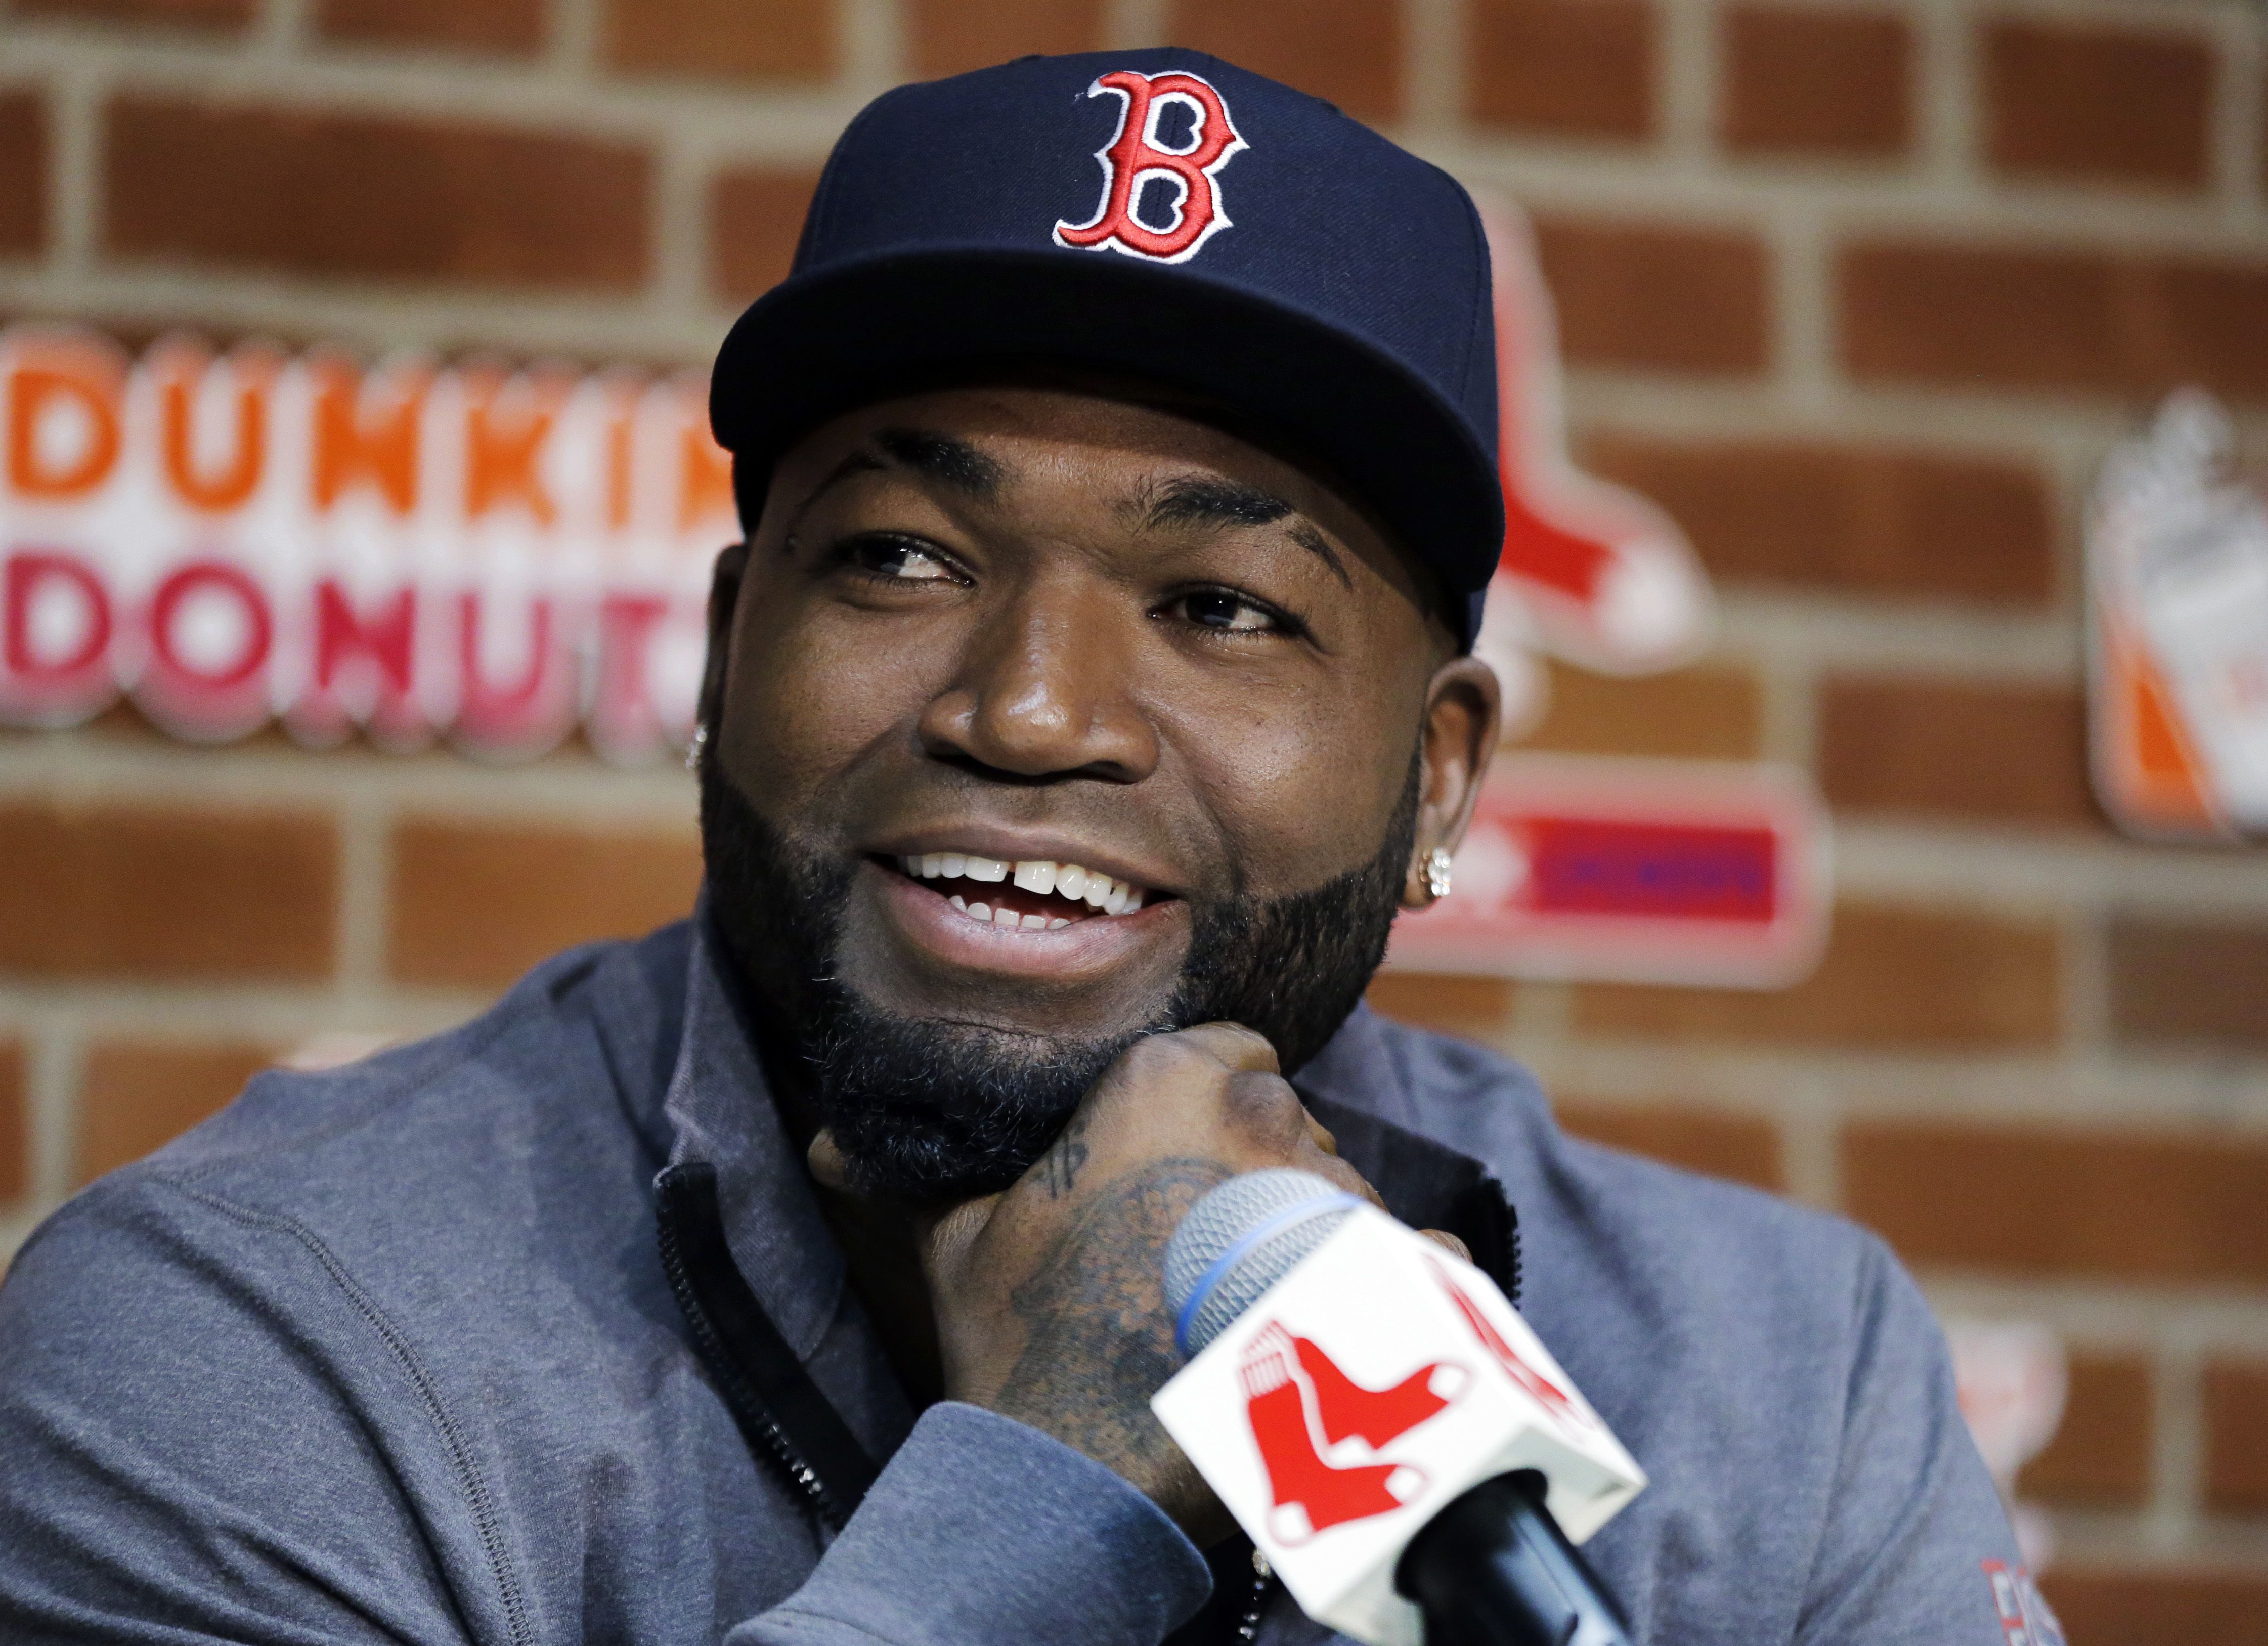 Want to Live Like Big Papi? David Ortiz's Weston House Is for Sale